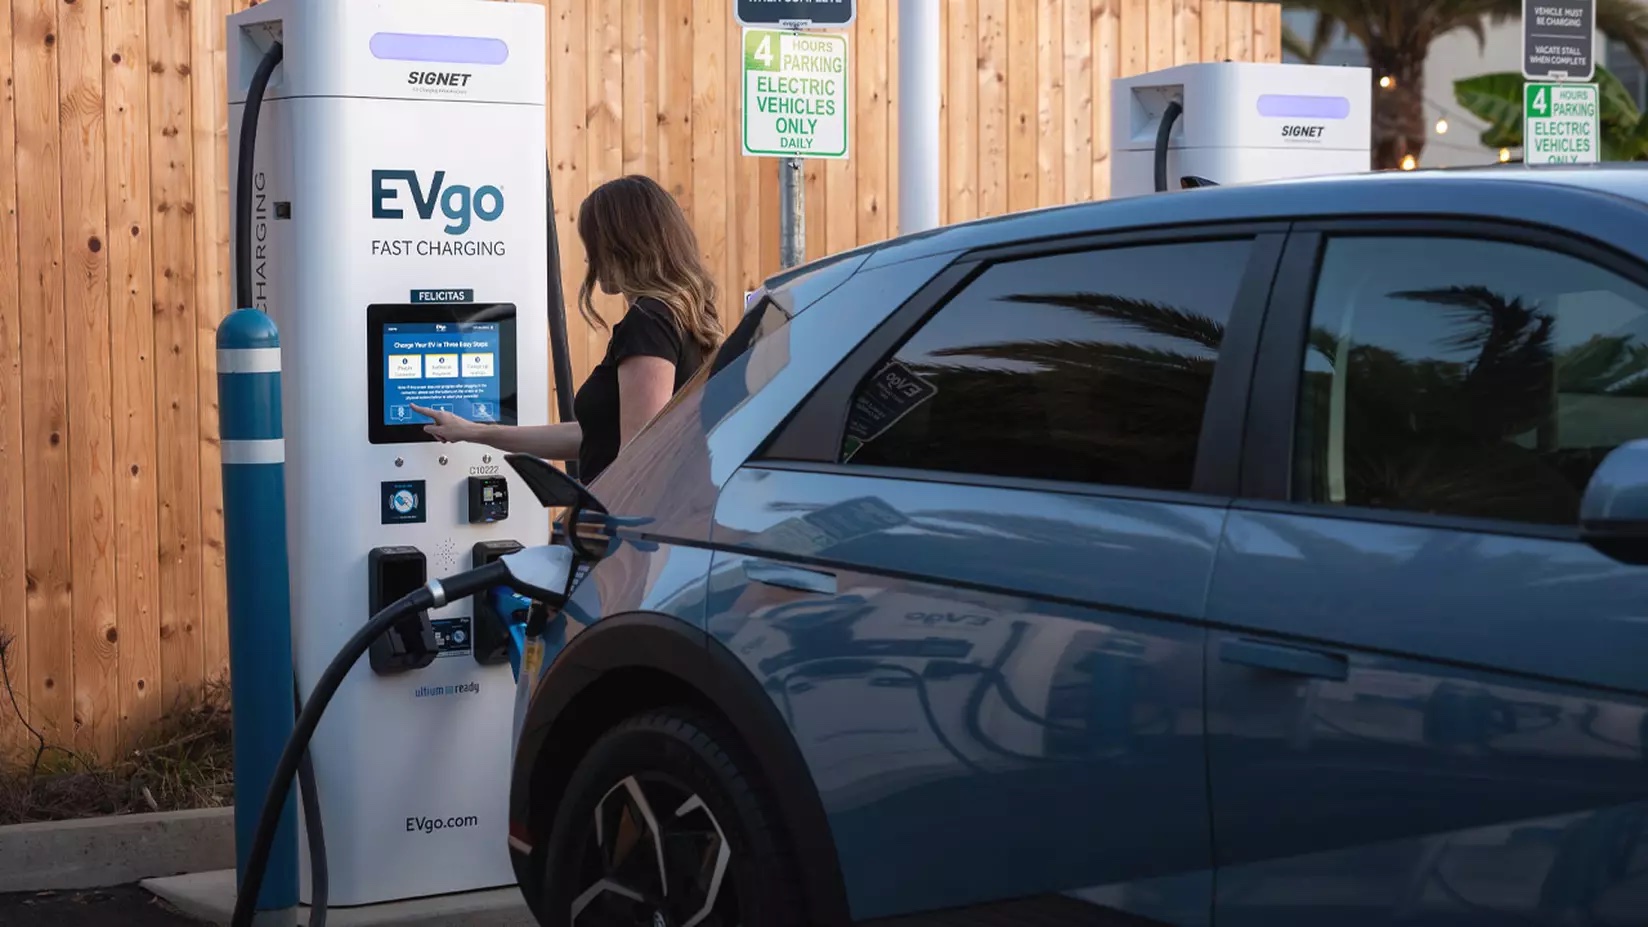 EVgo and Lyft Launch New Partnership to Accelerate Rideshare Electrification Nationwide